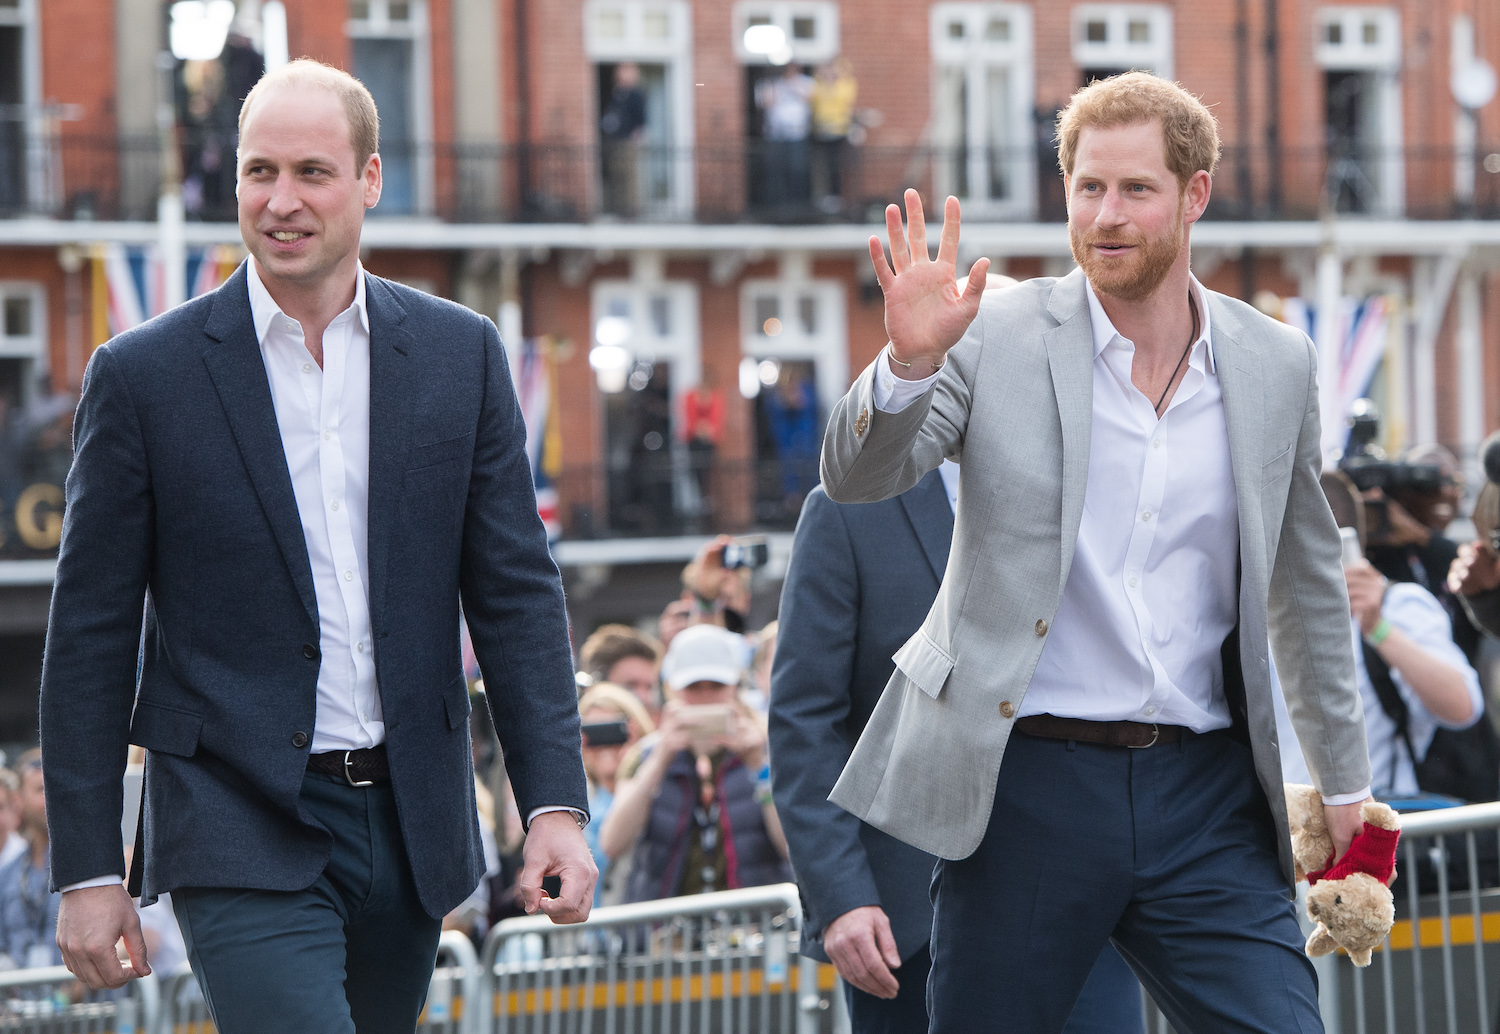 Prince Harry and Prince William meet the public in Windsor on the eve of the wedding at Windsor Castle on May 18, 2018